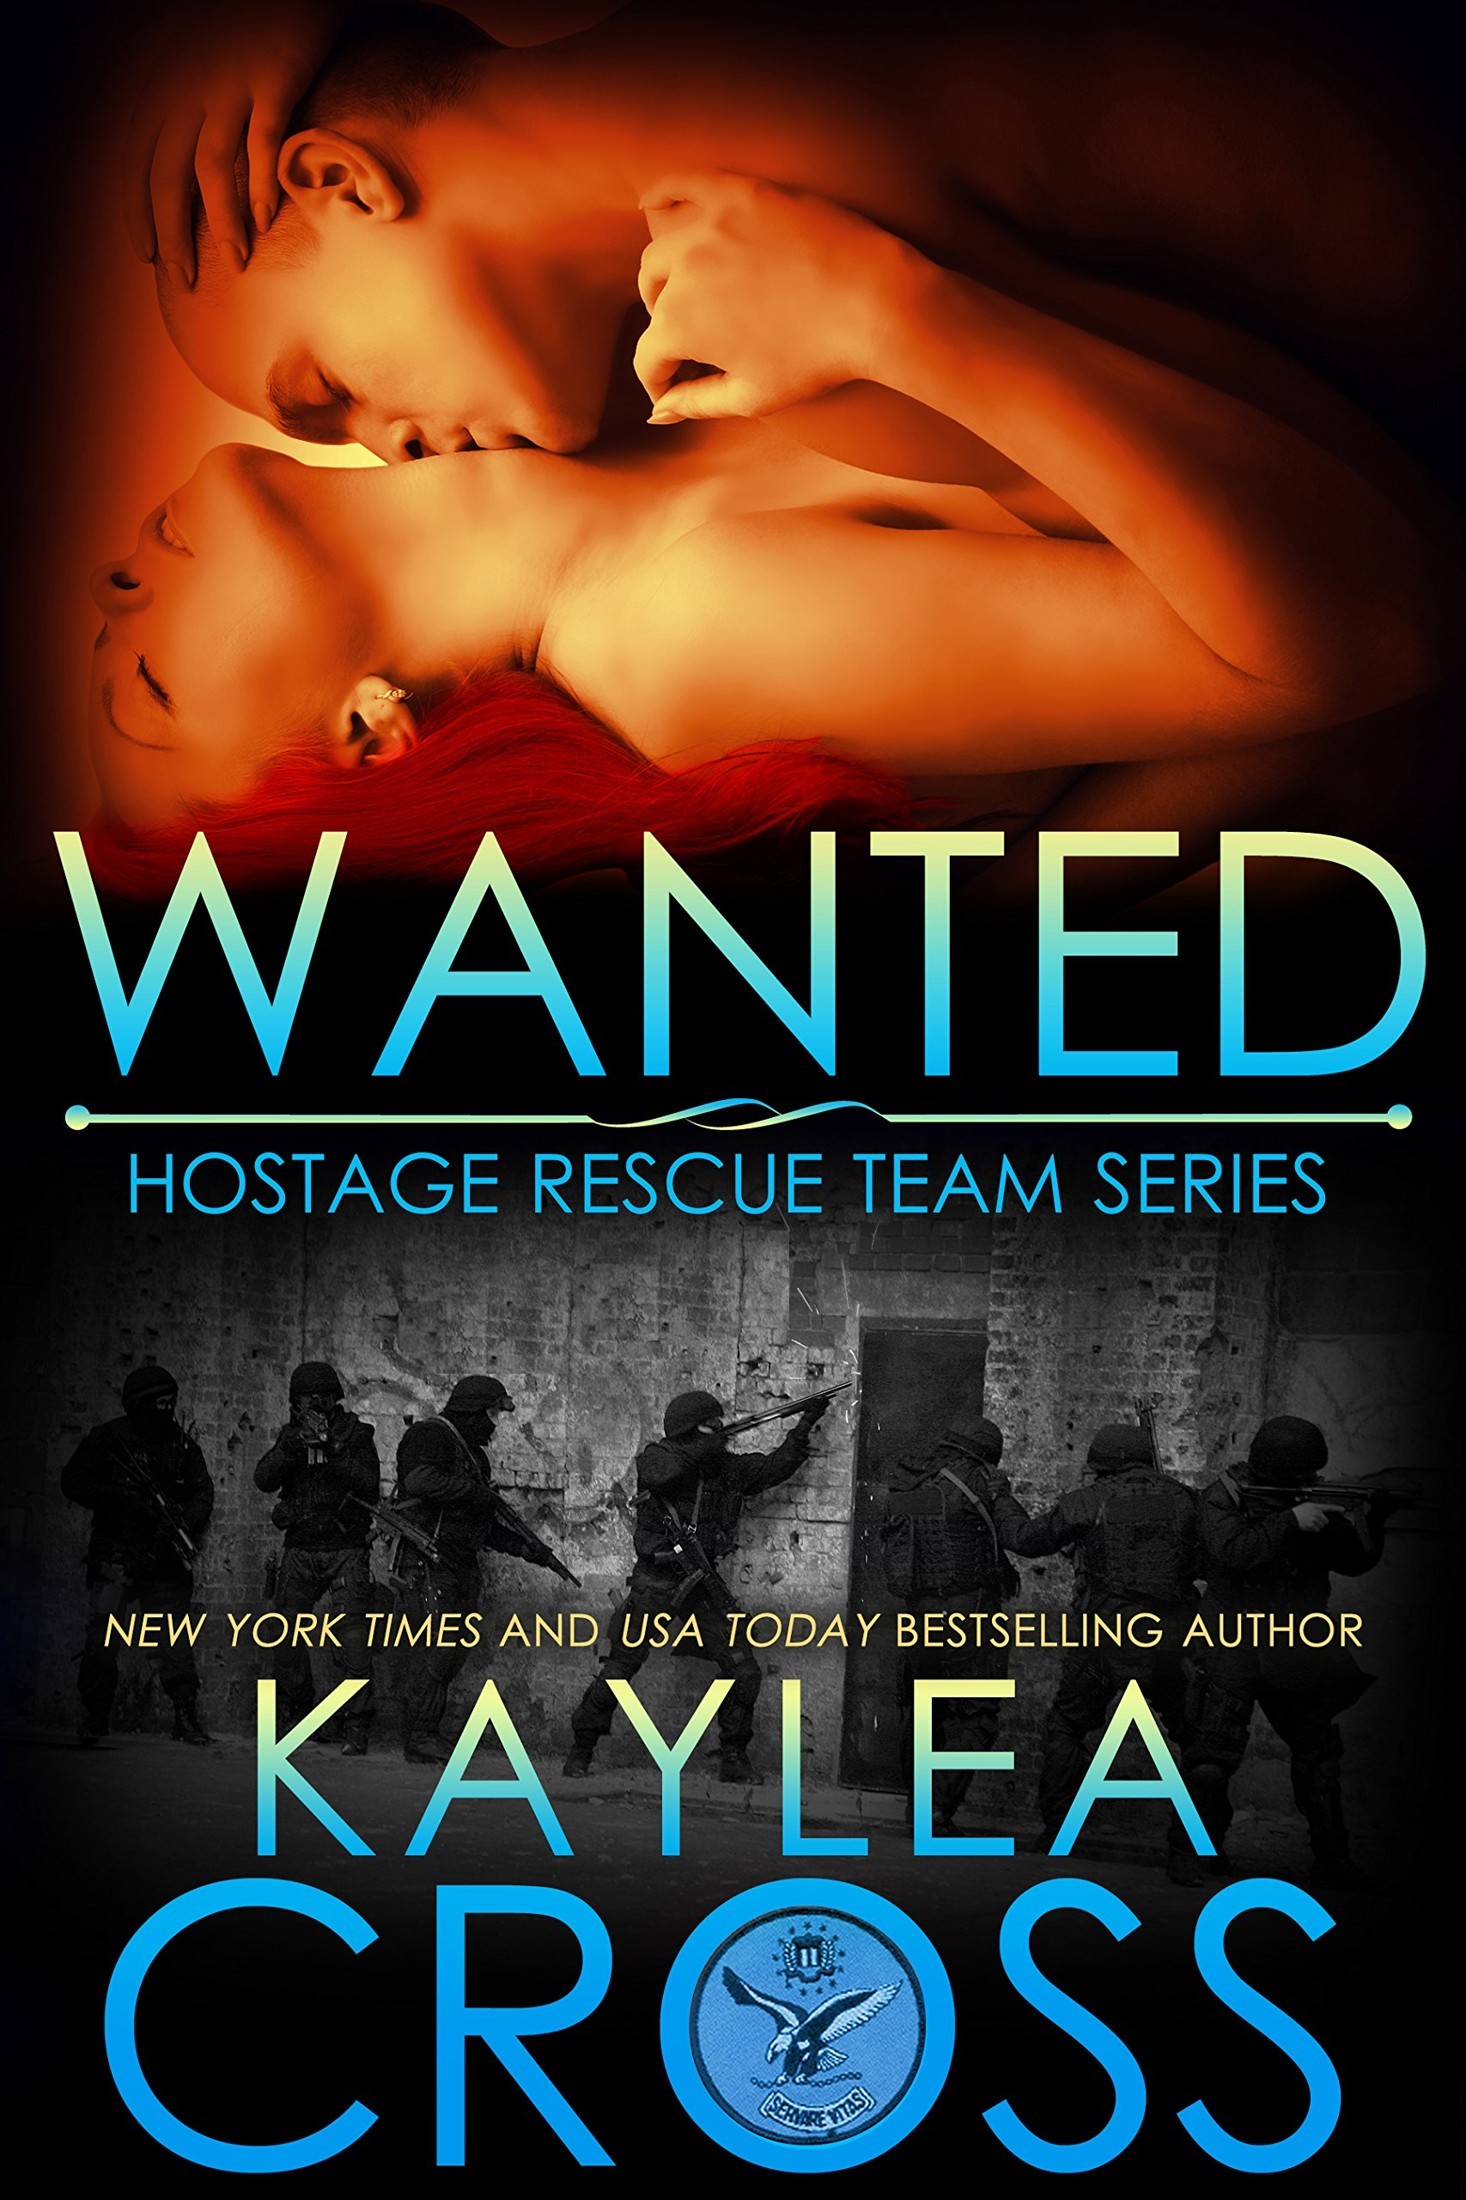 Wanted (Hostage Rescue Team Series Book 8) by Kaylea Cross